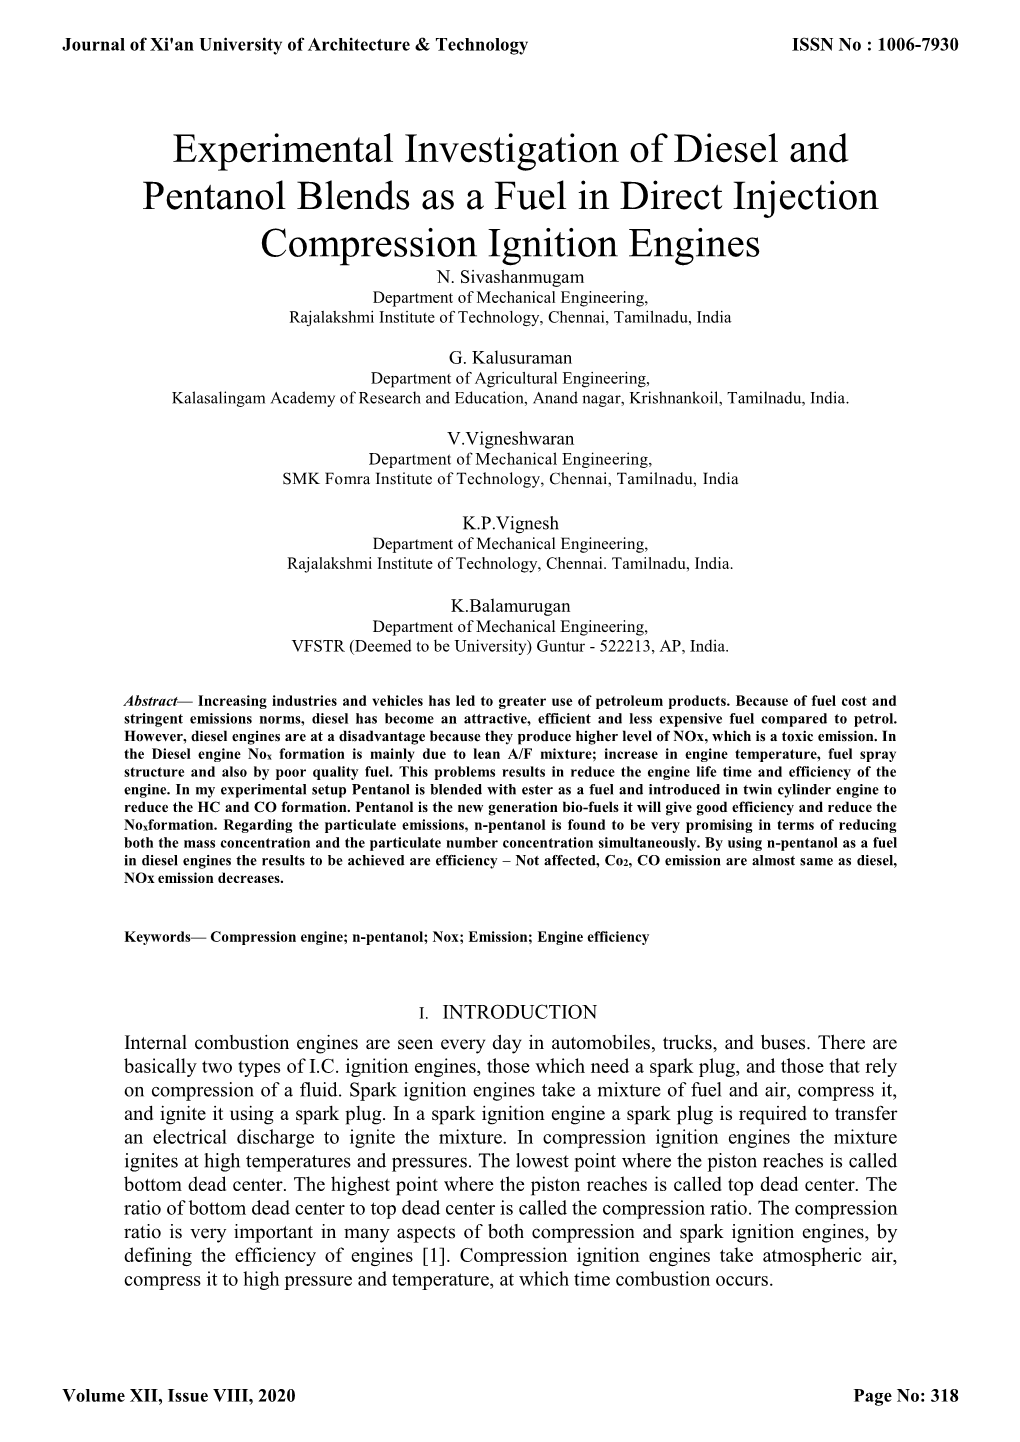 Experimental Investigation of Diesel and Pentanol Blends As a Fuel in Direct Injection Compression Ignition Engines N